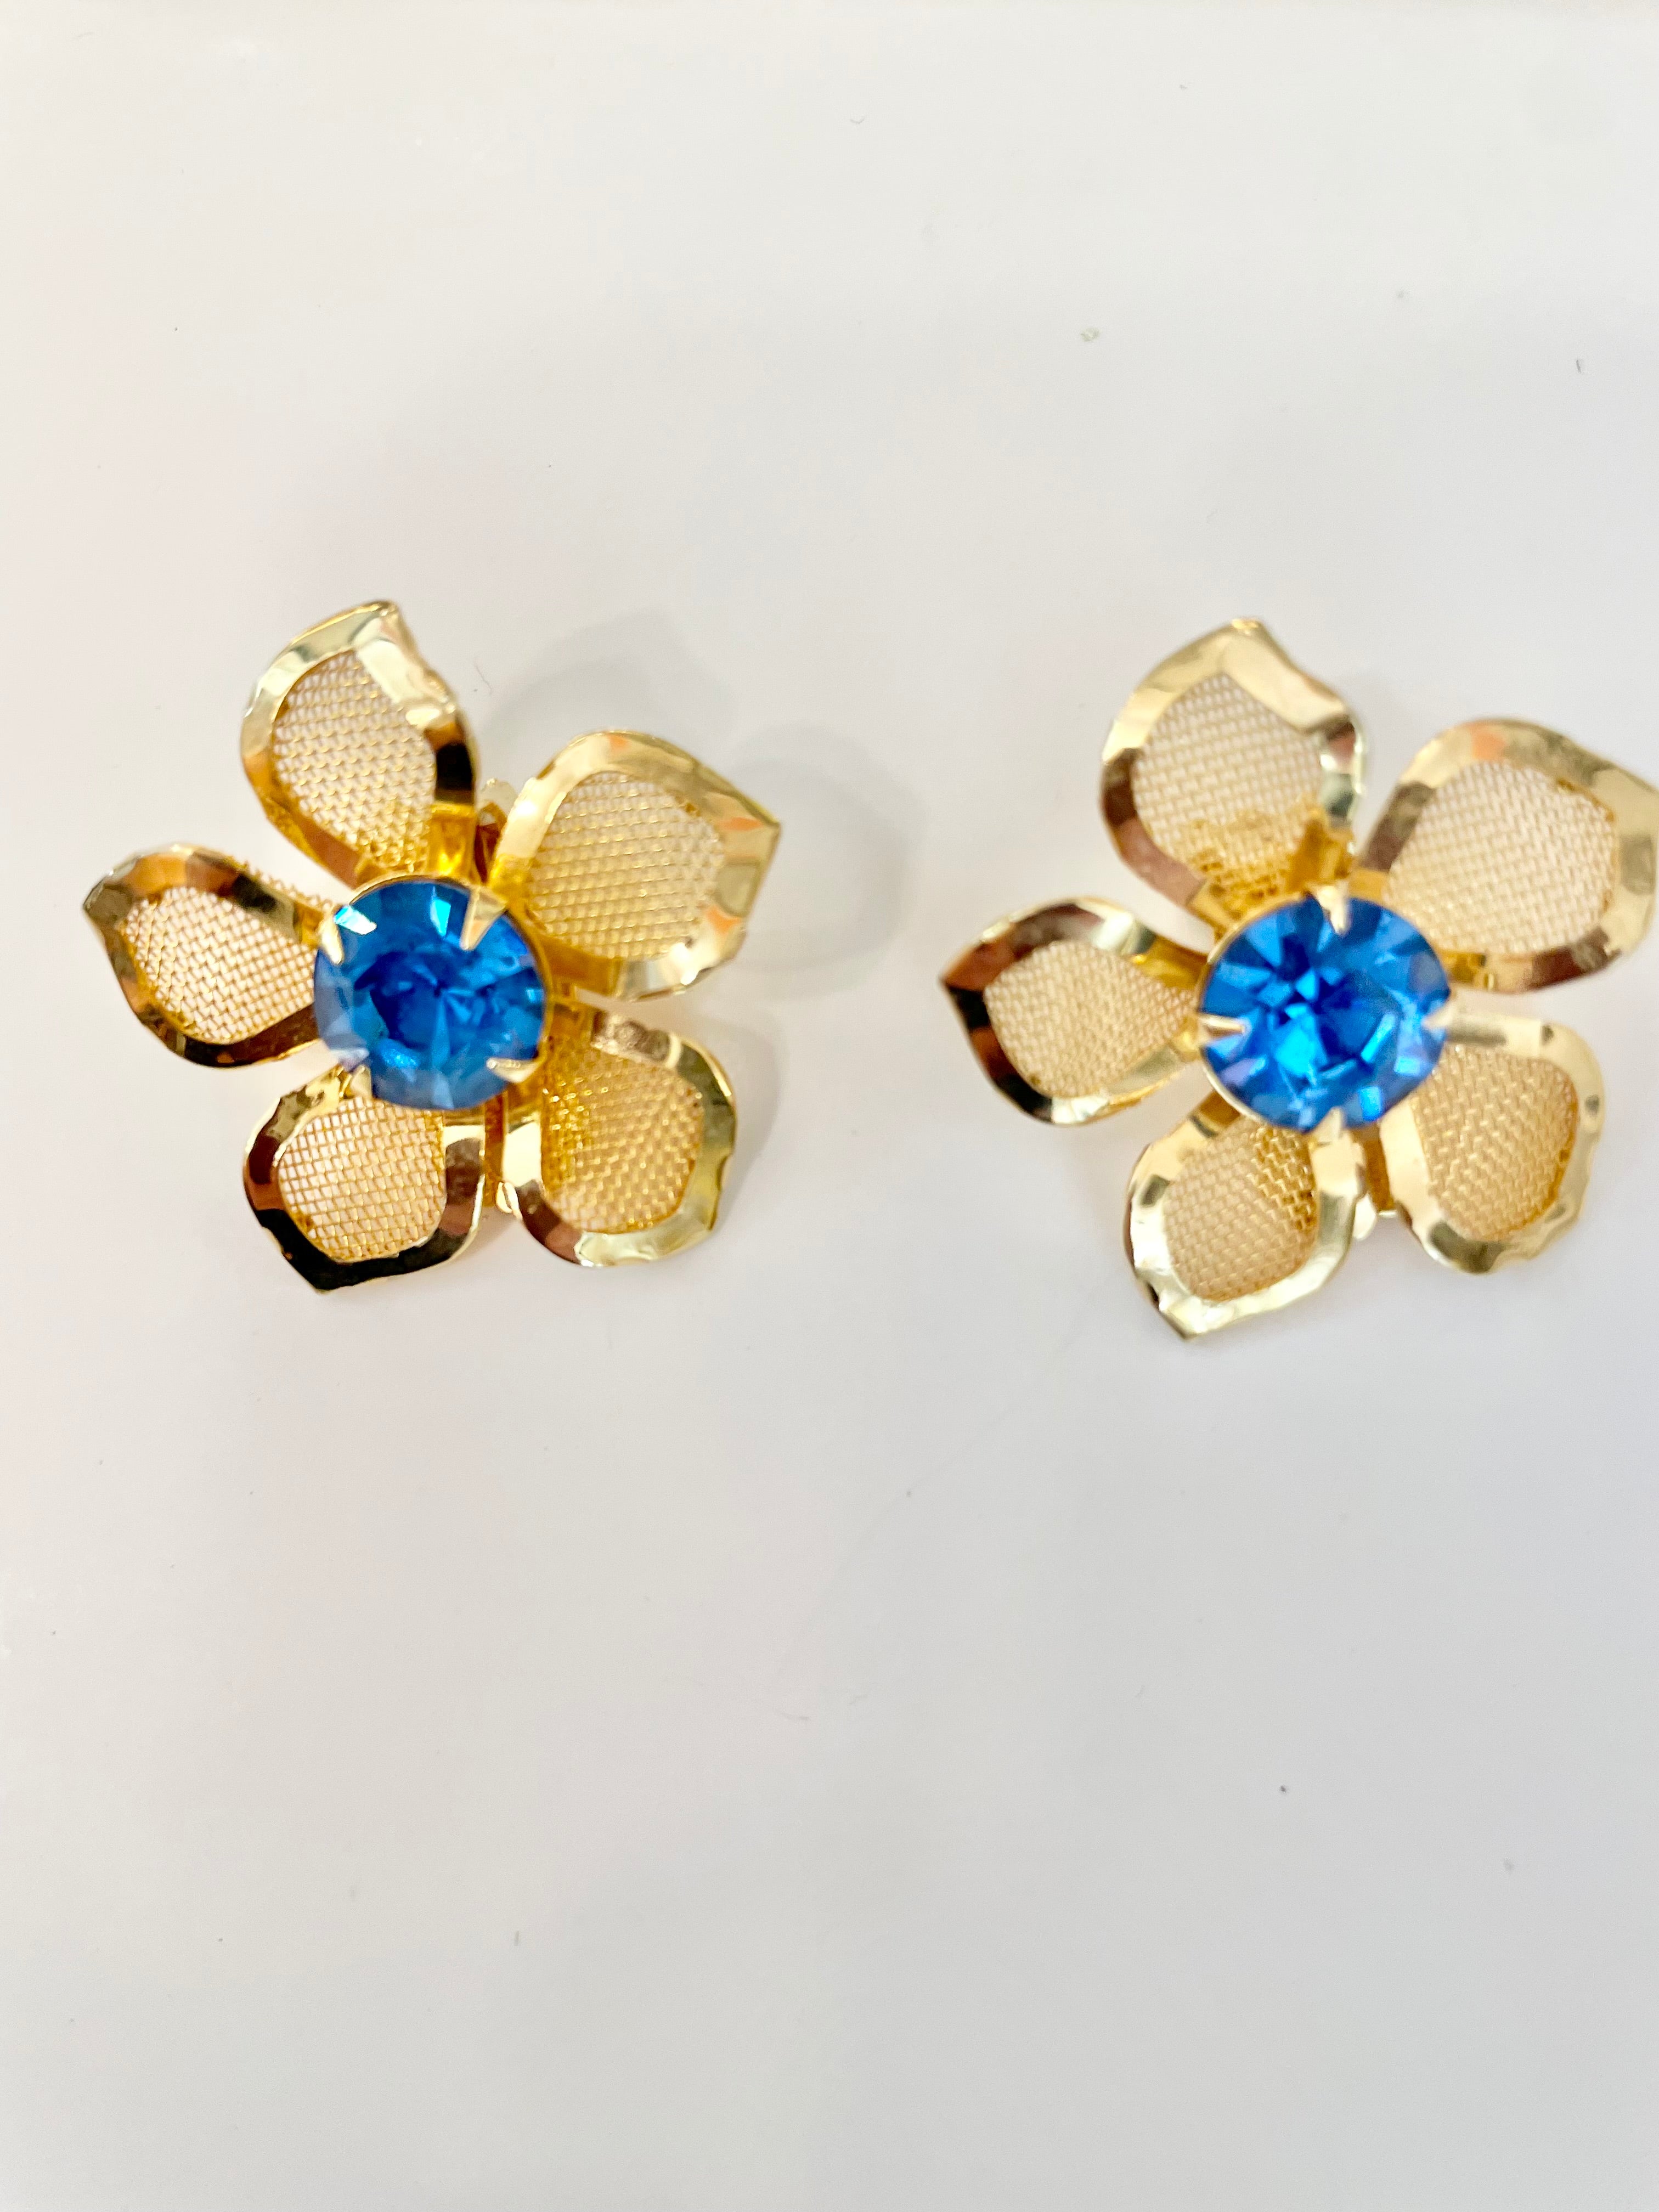 The most classy gold flower earrings ..... so chic